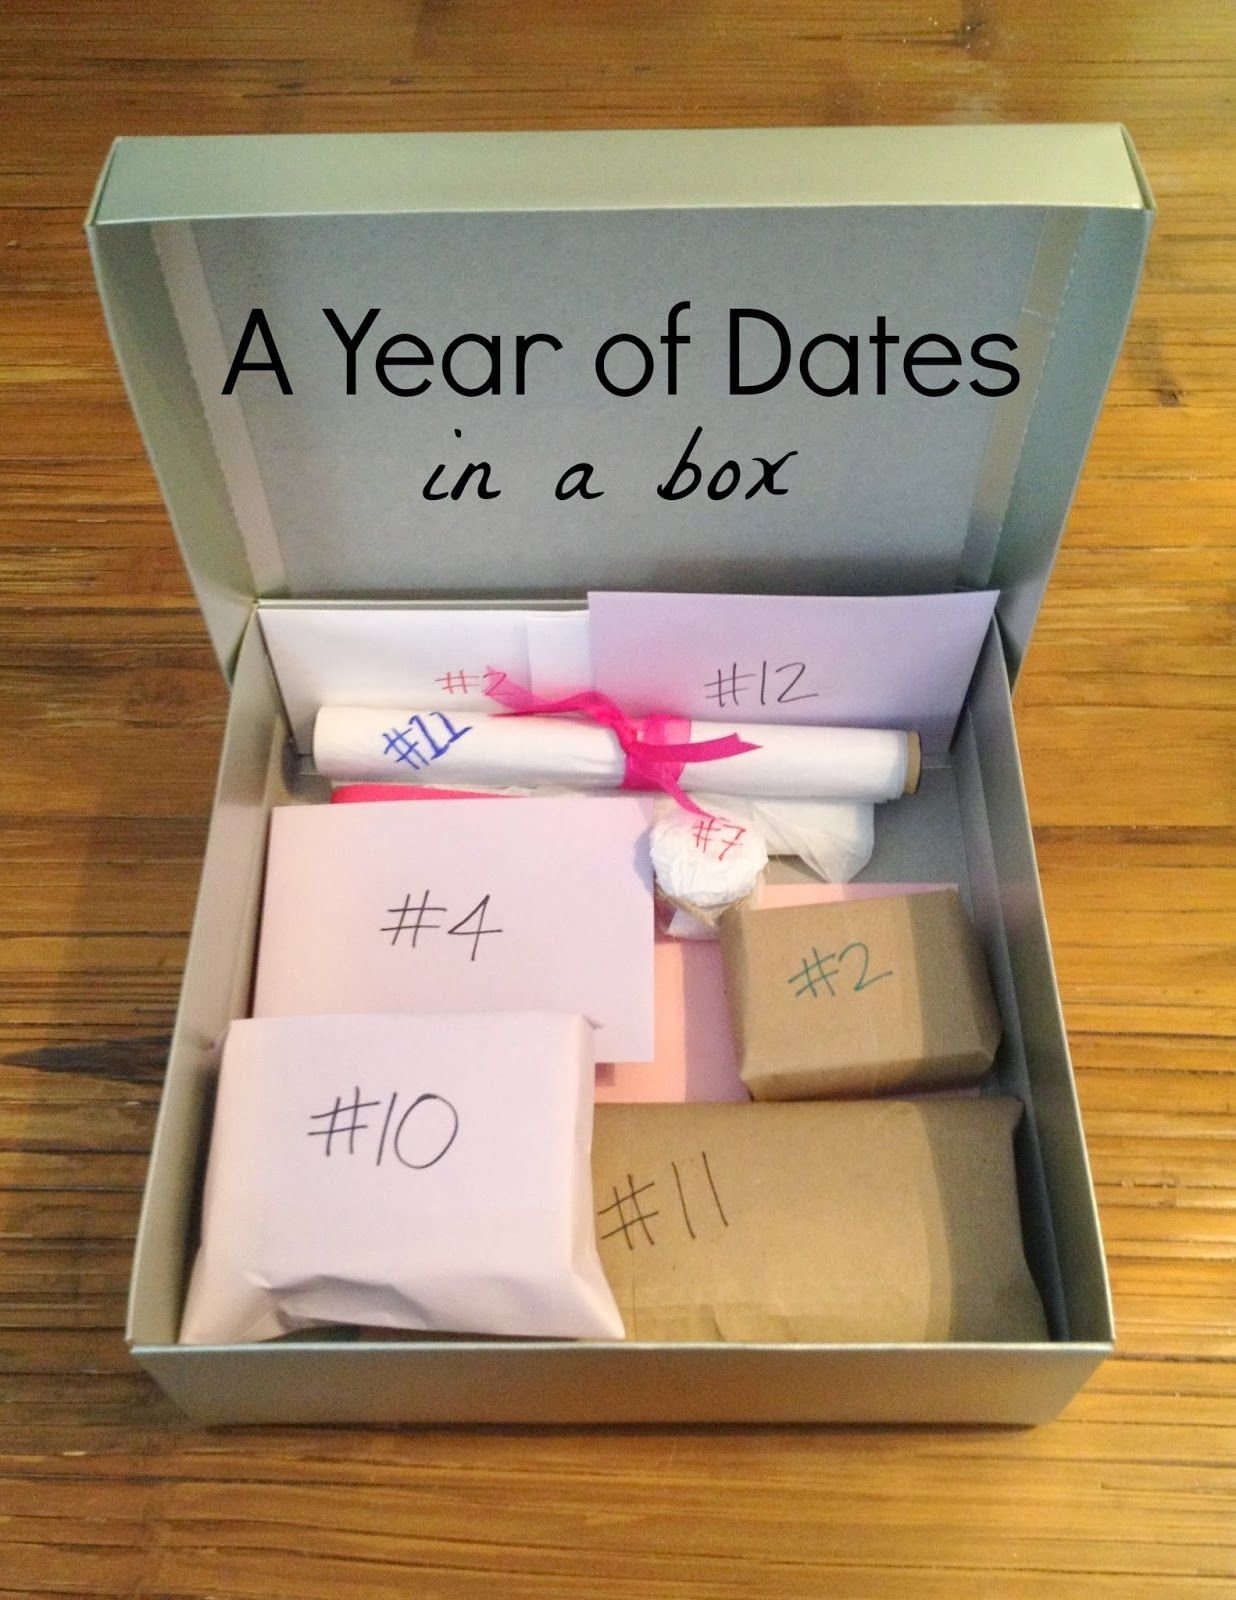 10 Unique Creative Anniversary Gift Ideas For Him gift the couples in your life with a creative box of date nights for 2022